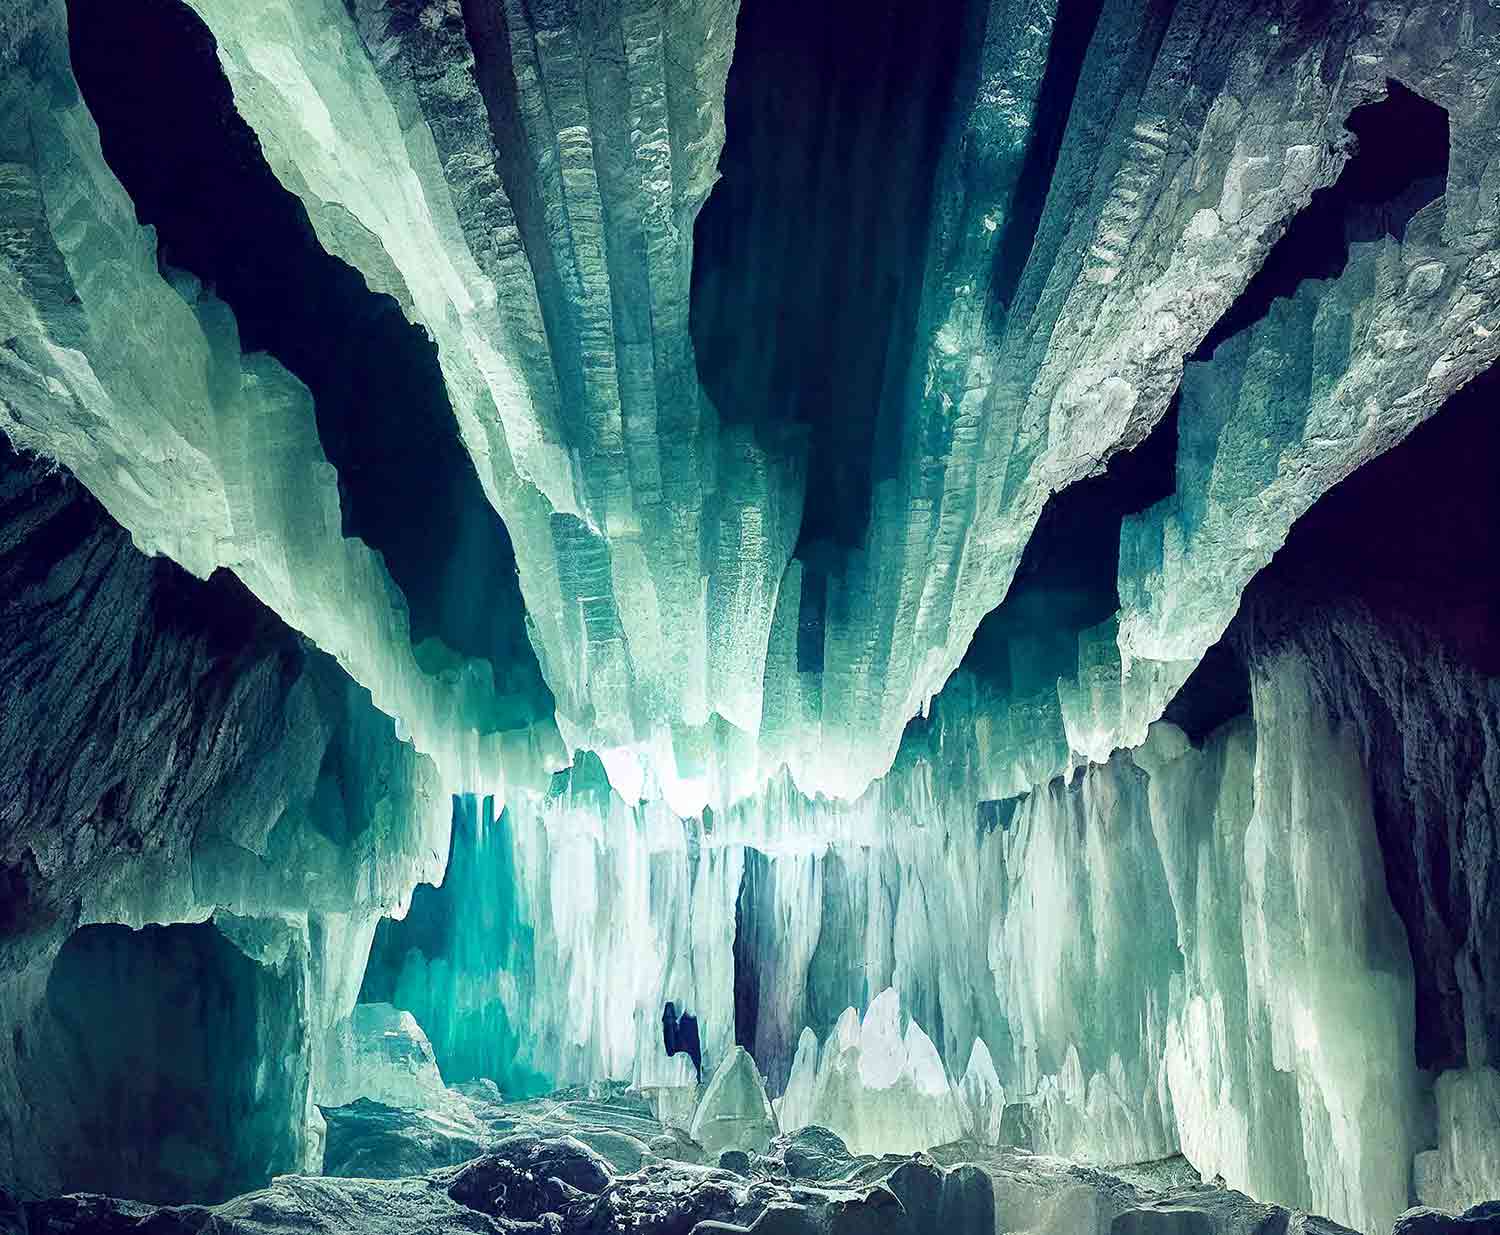 Large crystals grow inside a cave.